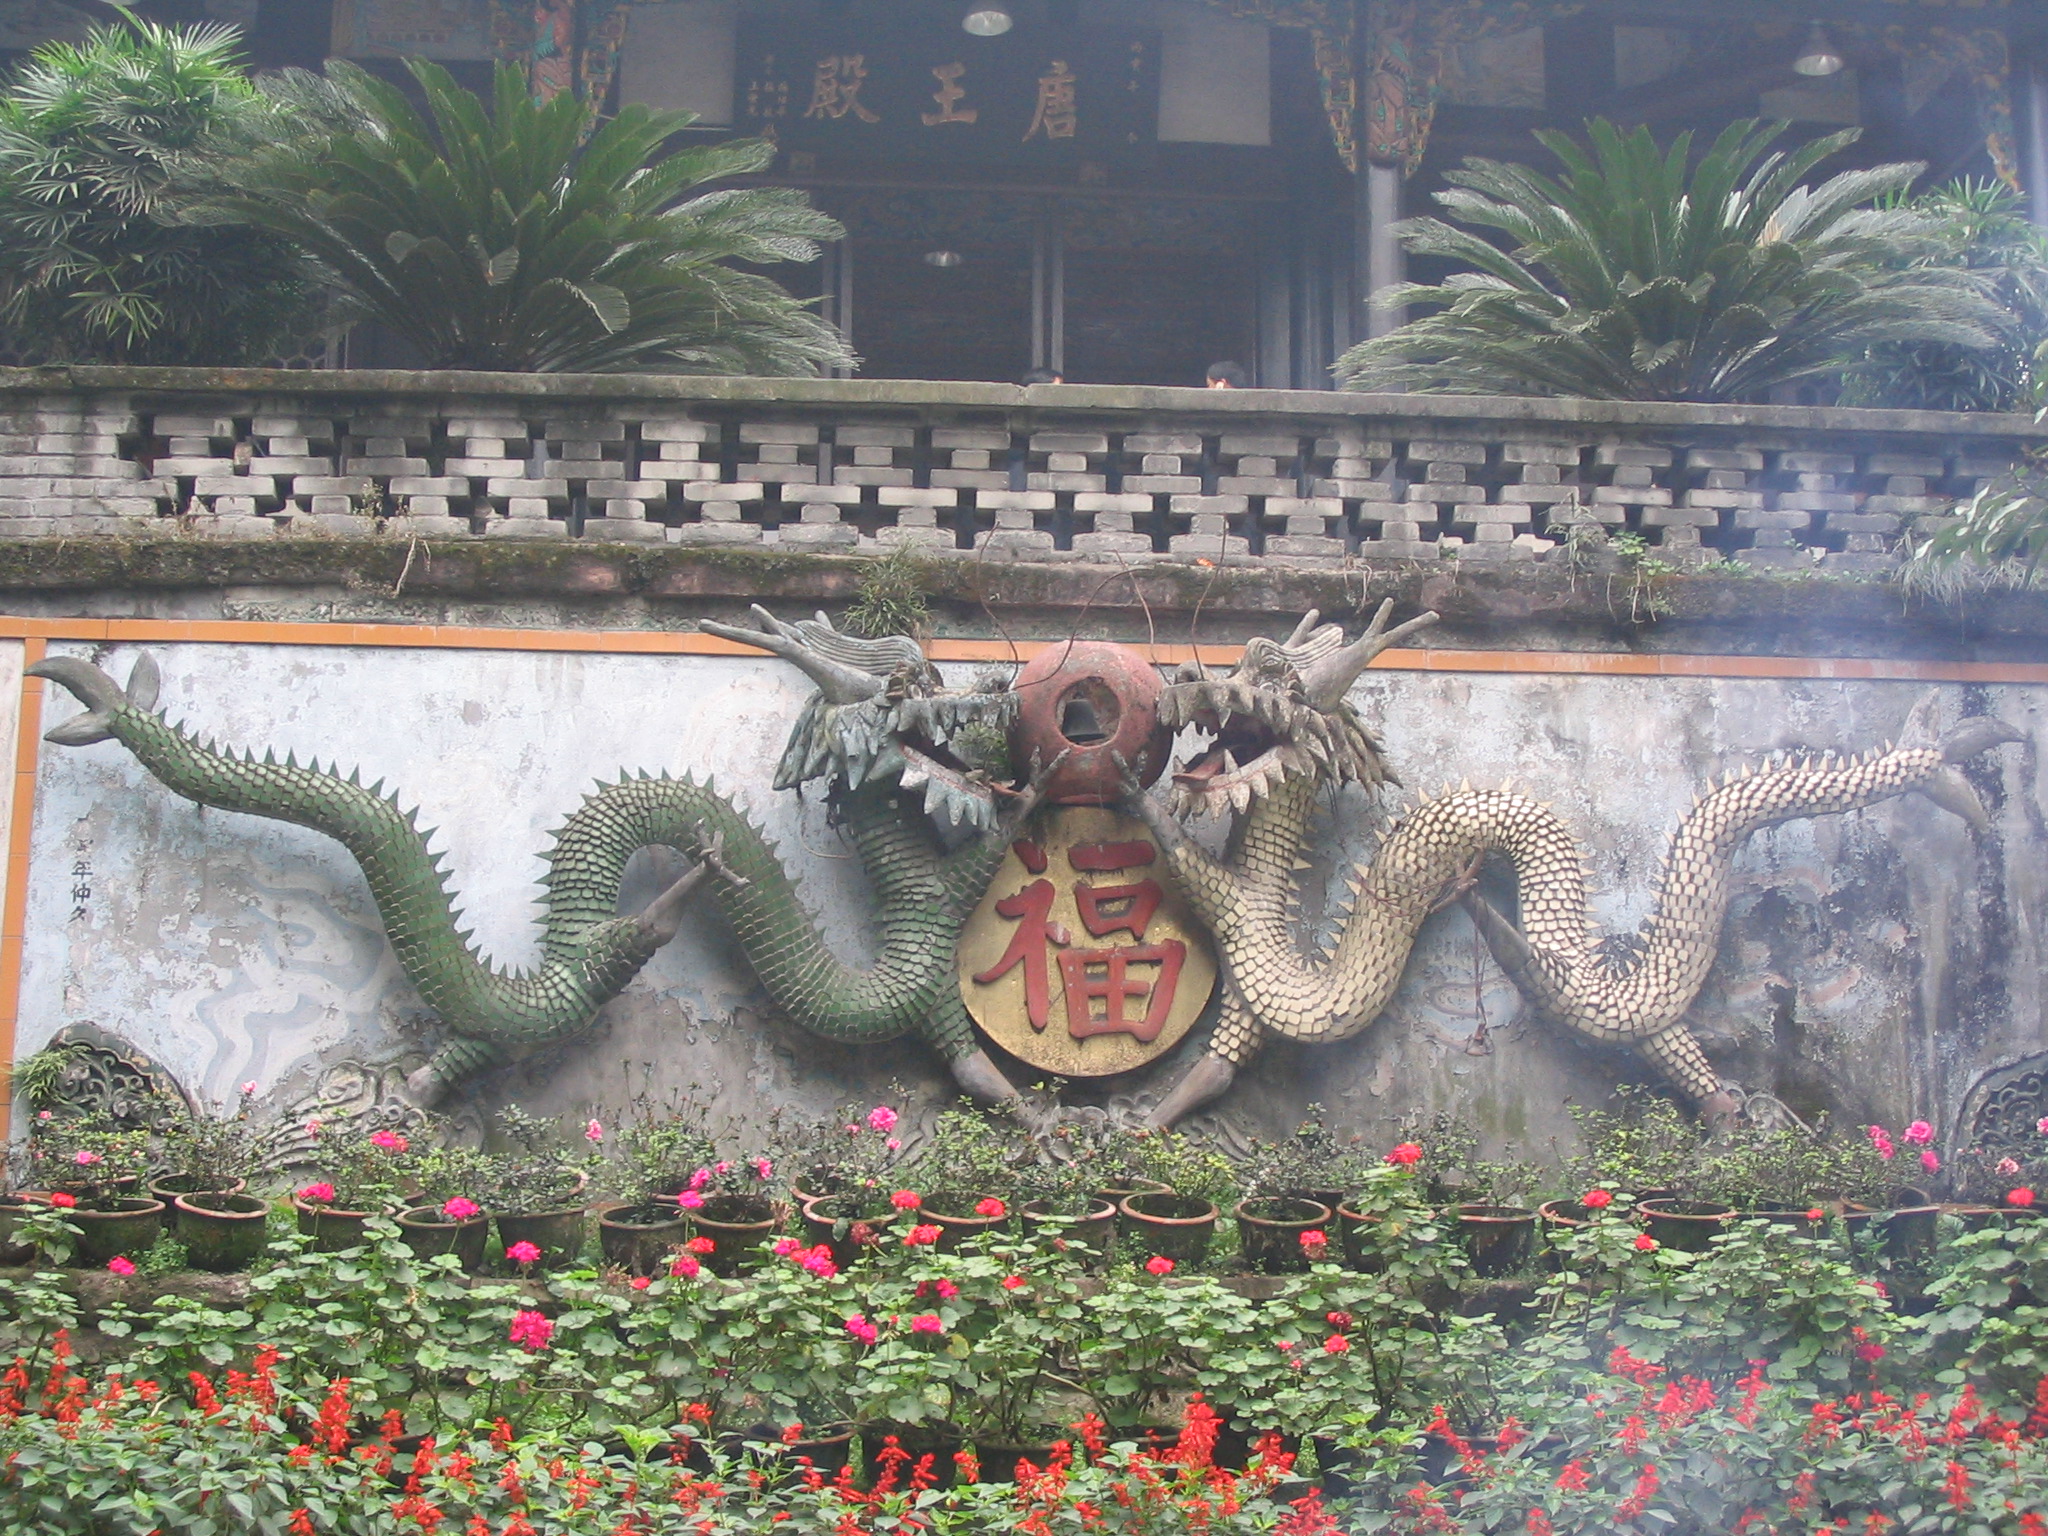 Two dragons and the character fu meaning good luck. Qingyanggong temple Chengdu Sichuan China